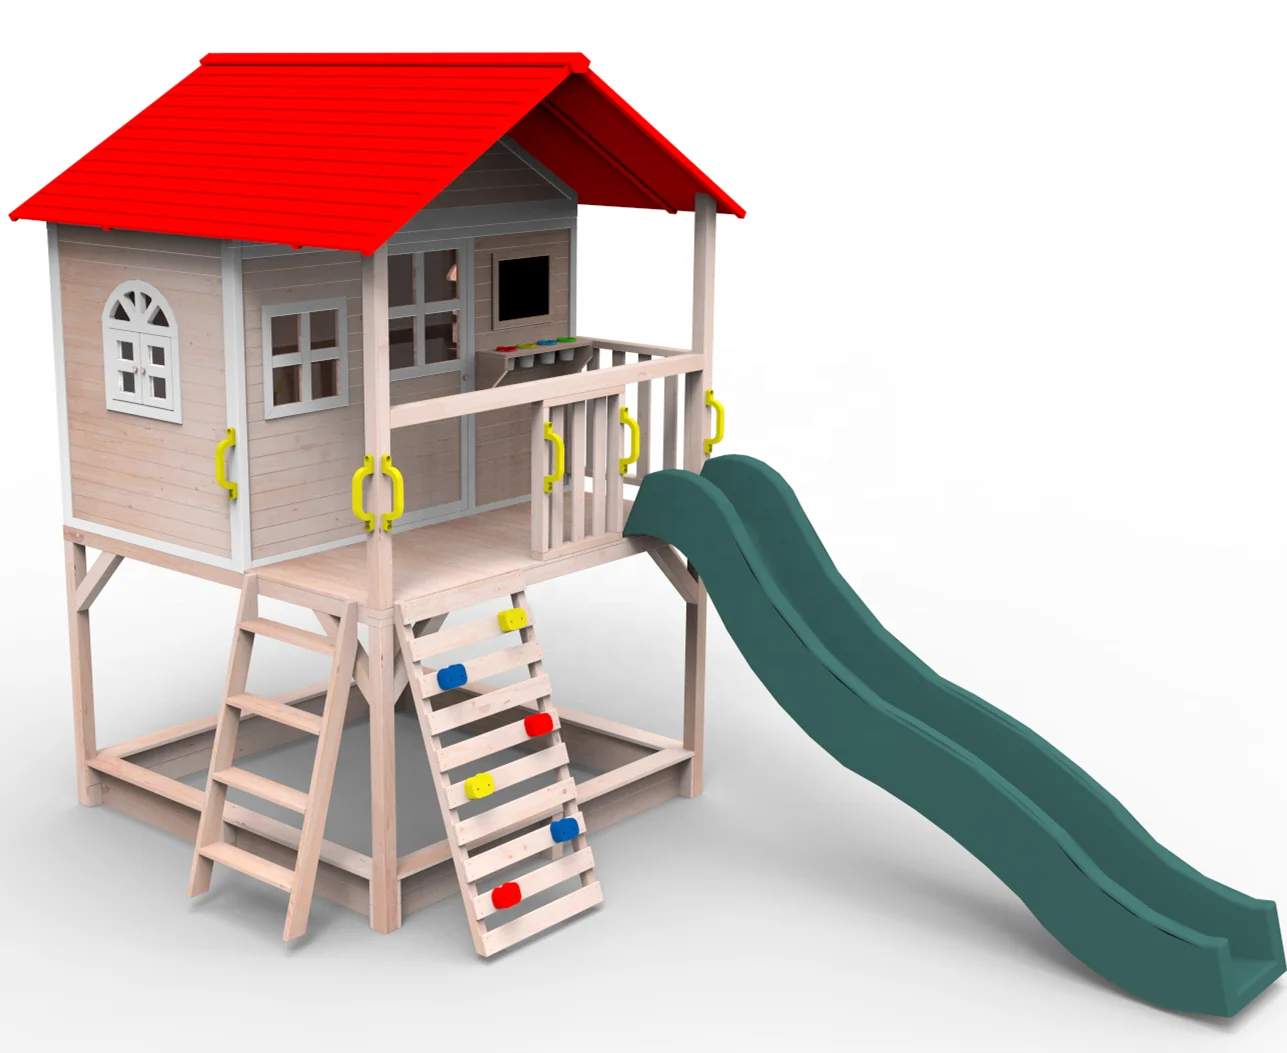 
Double deck wooden playground set kids playhouse with slide and sandbox  (60800687576)